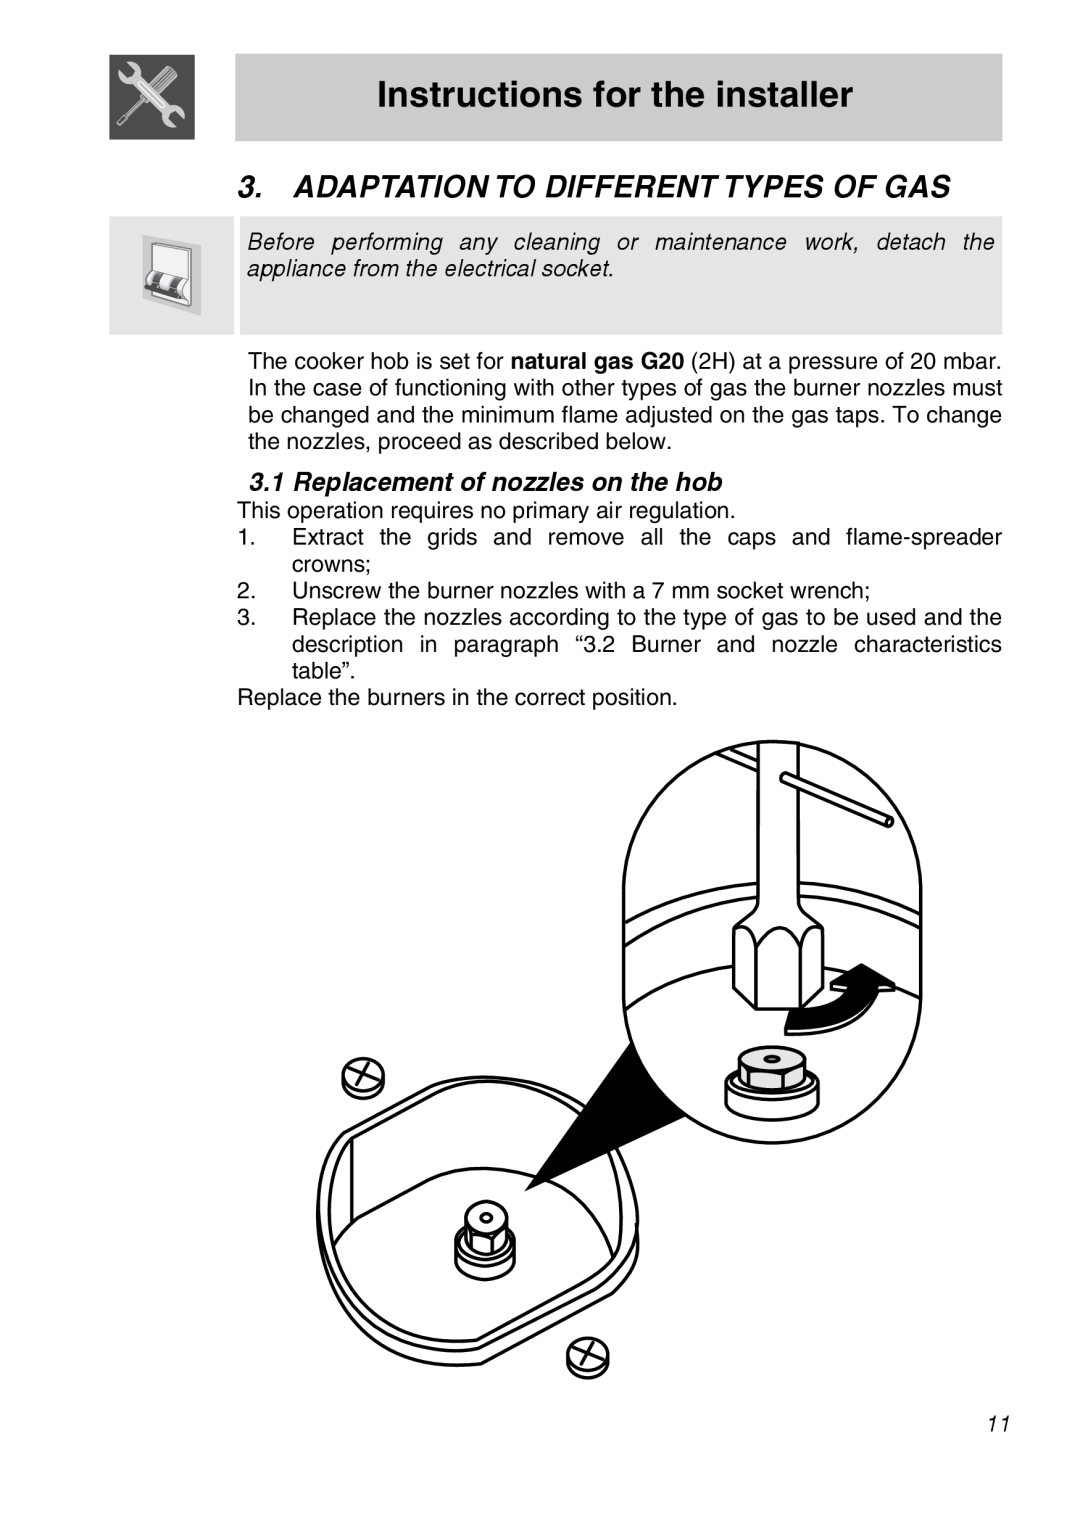 Smeg A11A-6 manual Adaptation To Different Types Of Gas, Instructions for the installer, Replacement of nozzles on the hob 